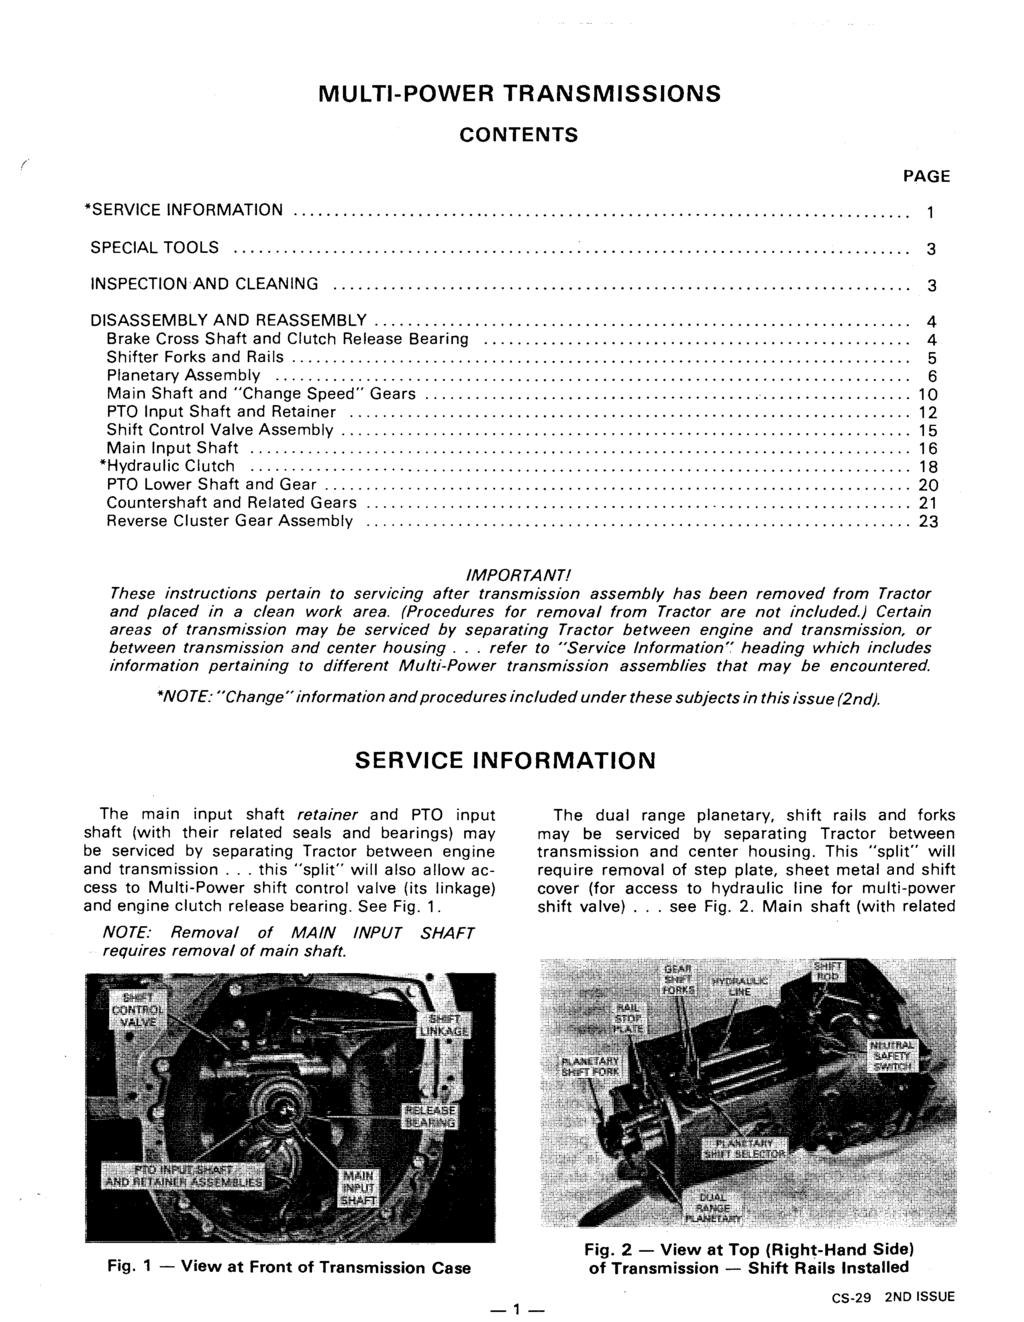 MULTI-POWER TRANSMISSIONS CONTENTS ( *SERVICE INFORMATION... "... " 1 SPECIAL TOOLS... :... 3 INSPECTION AND CLEANING... 3 DISASSEMBLY AND REASSEMBLY................................................................ 4 Brake Cross Shaft and Clutch Release Bearing.